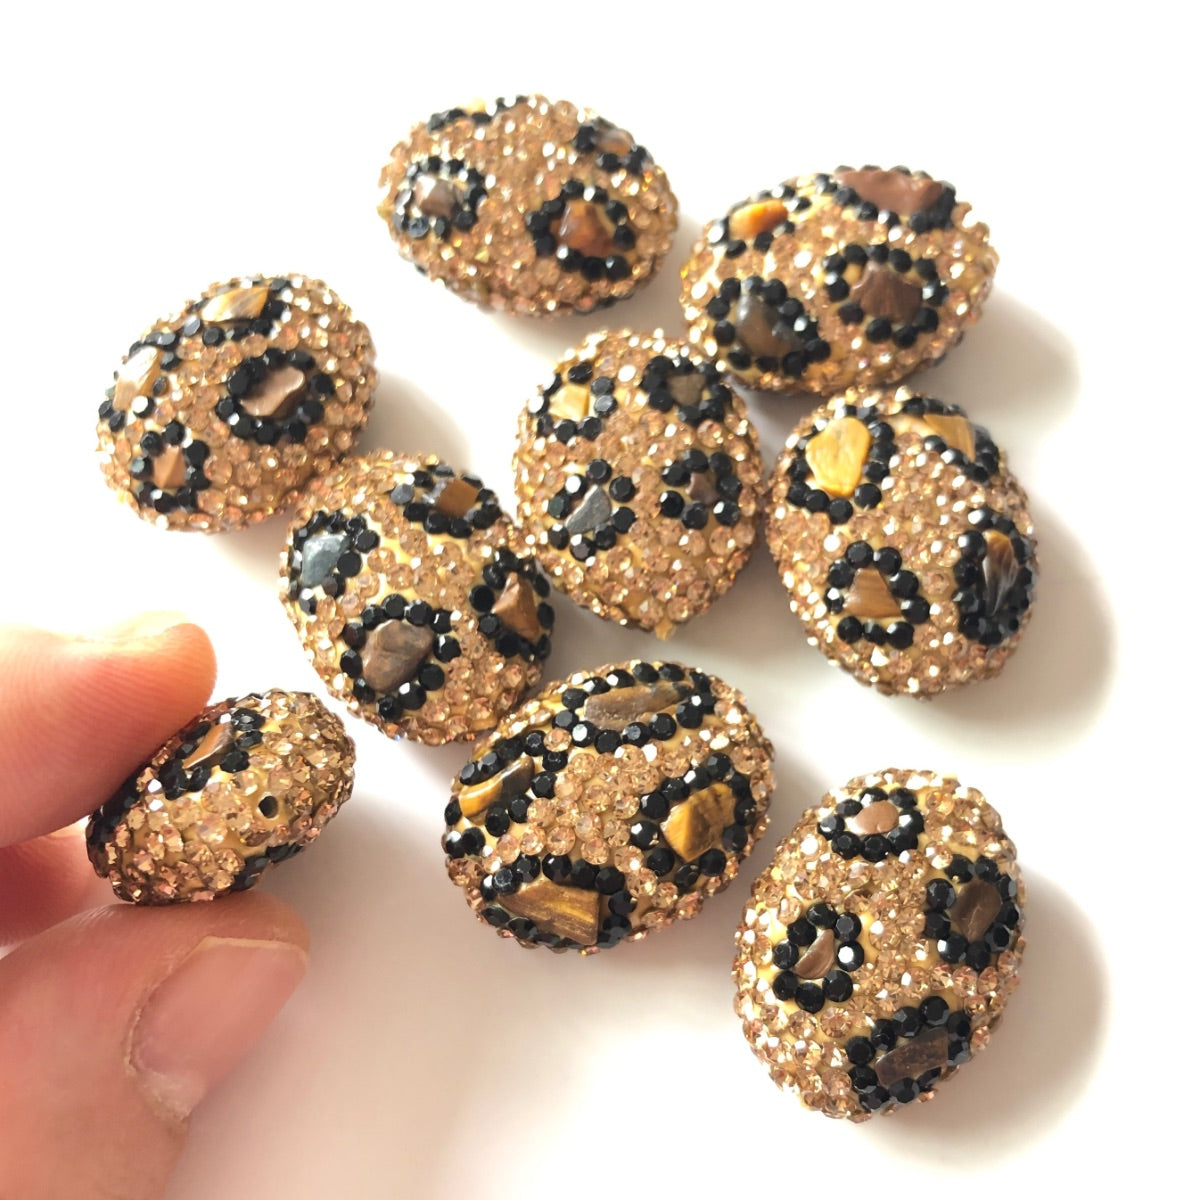 5pcs 24*19mm Leopard Print Rhinestone Pave Oval Clay Bead Spacers/ Foc –  Charms Beads Beyond